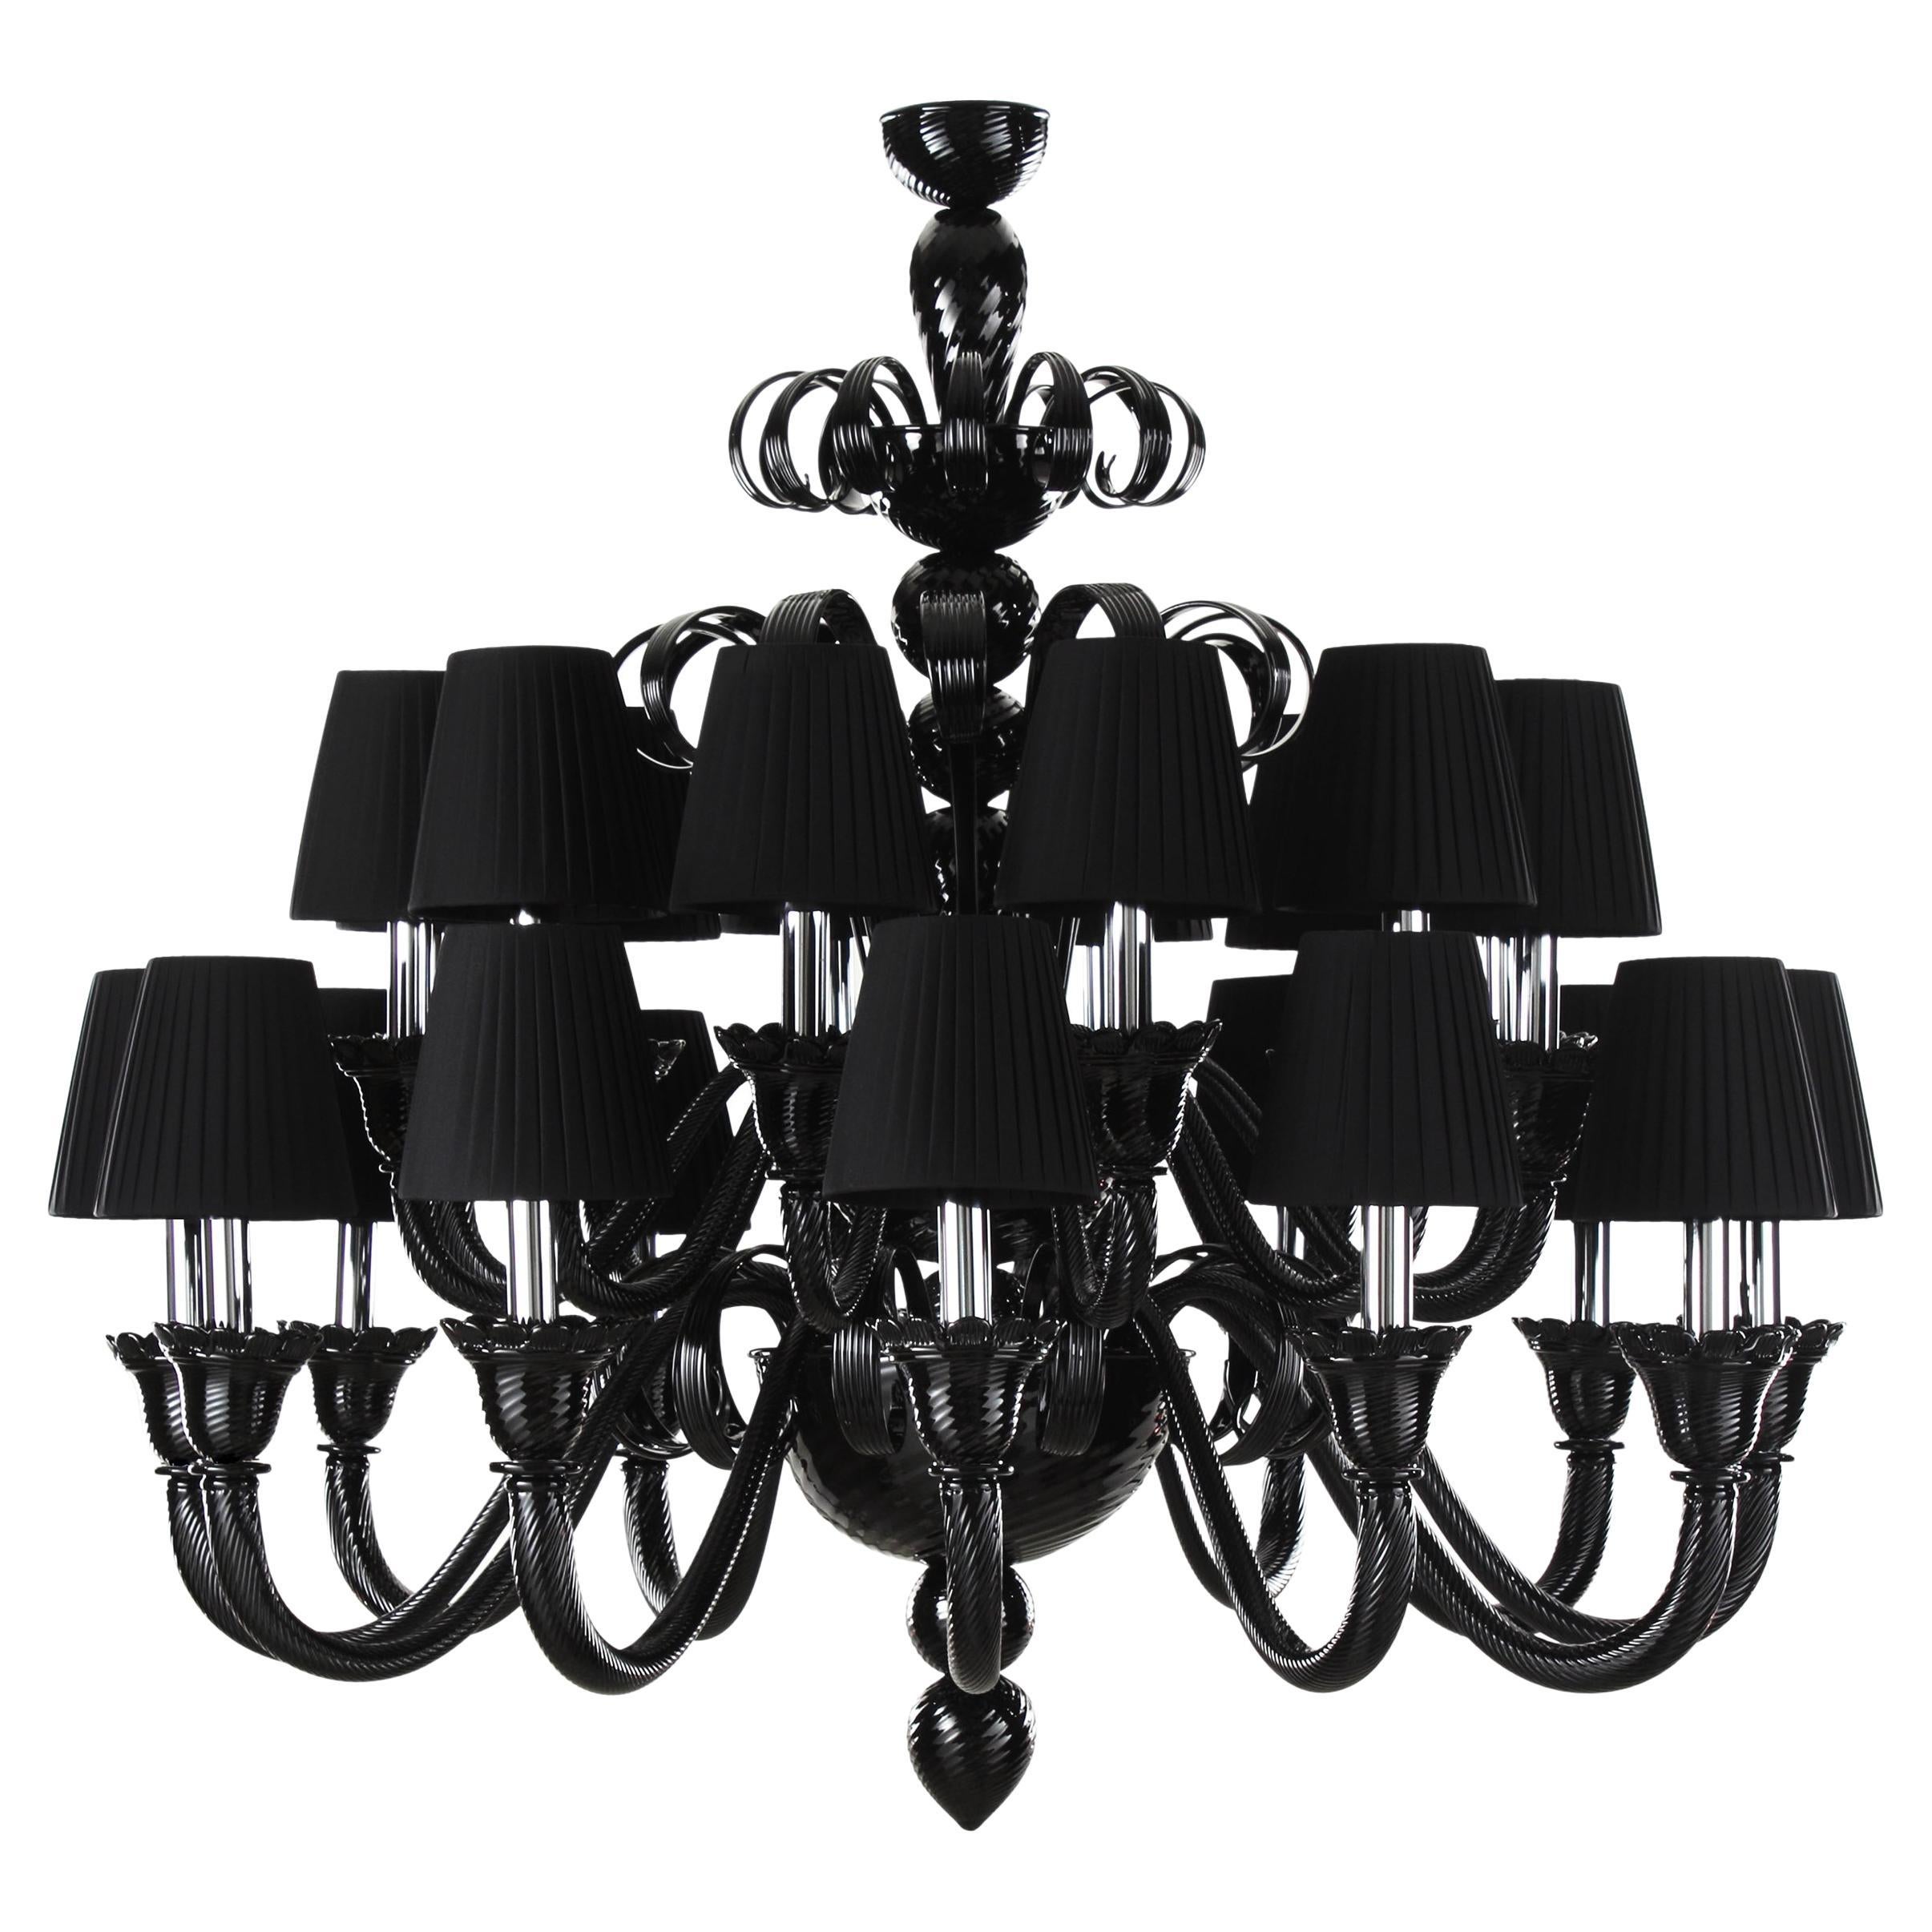 Artistic Chandelier 12+12 Arms Black Murano Glass, Lampshades IKO by Multiforme For Sale